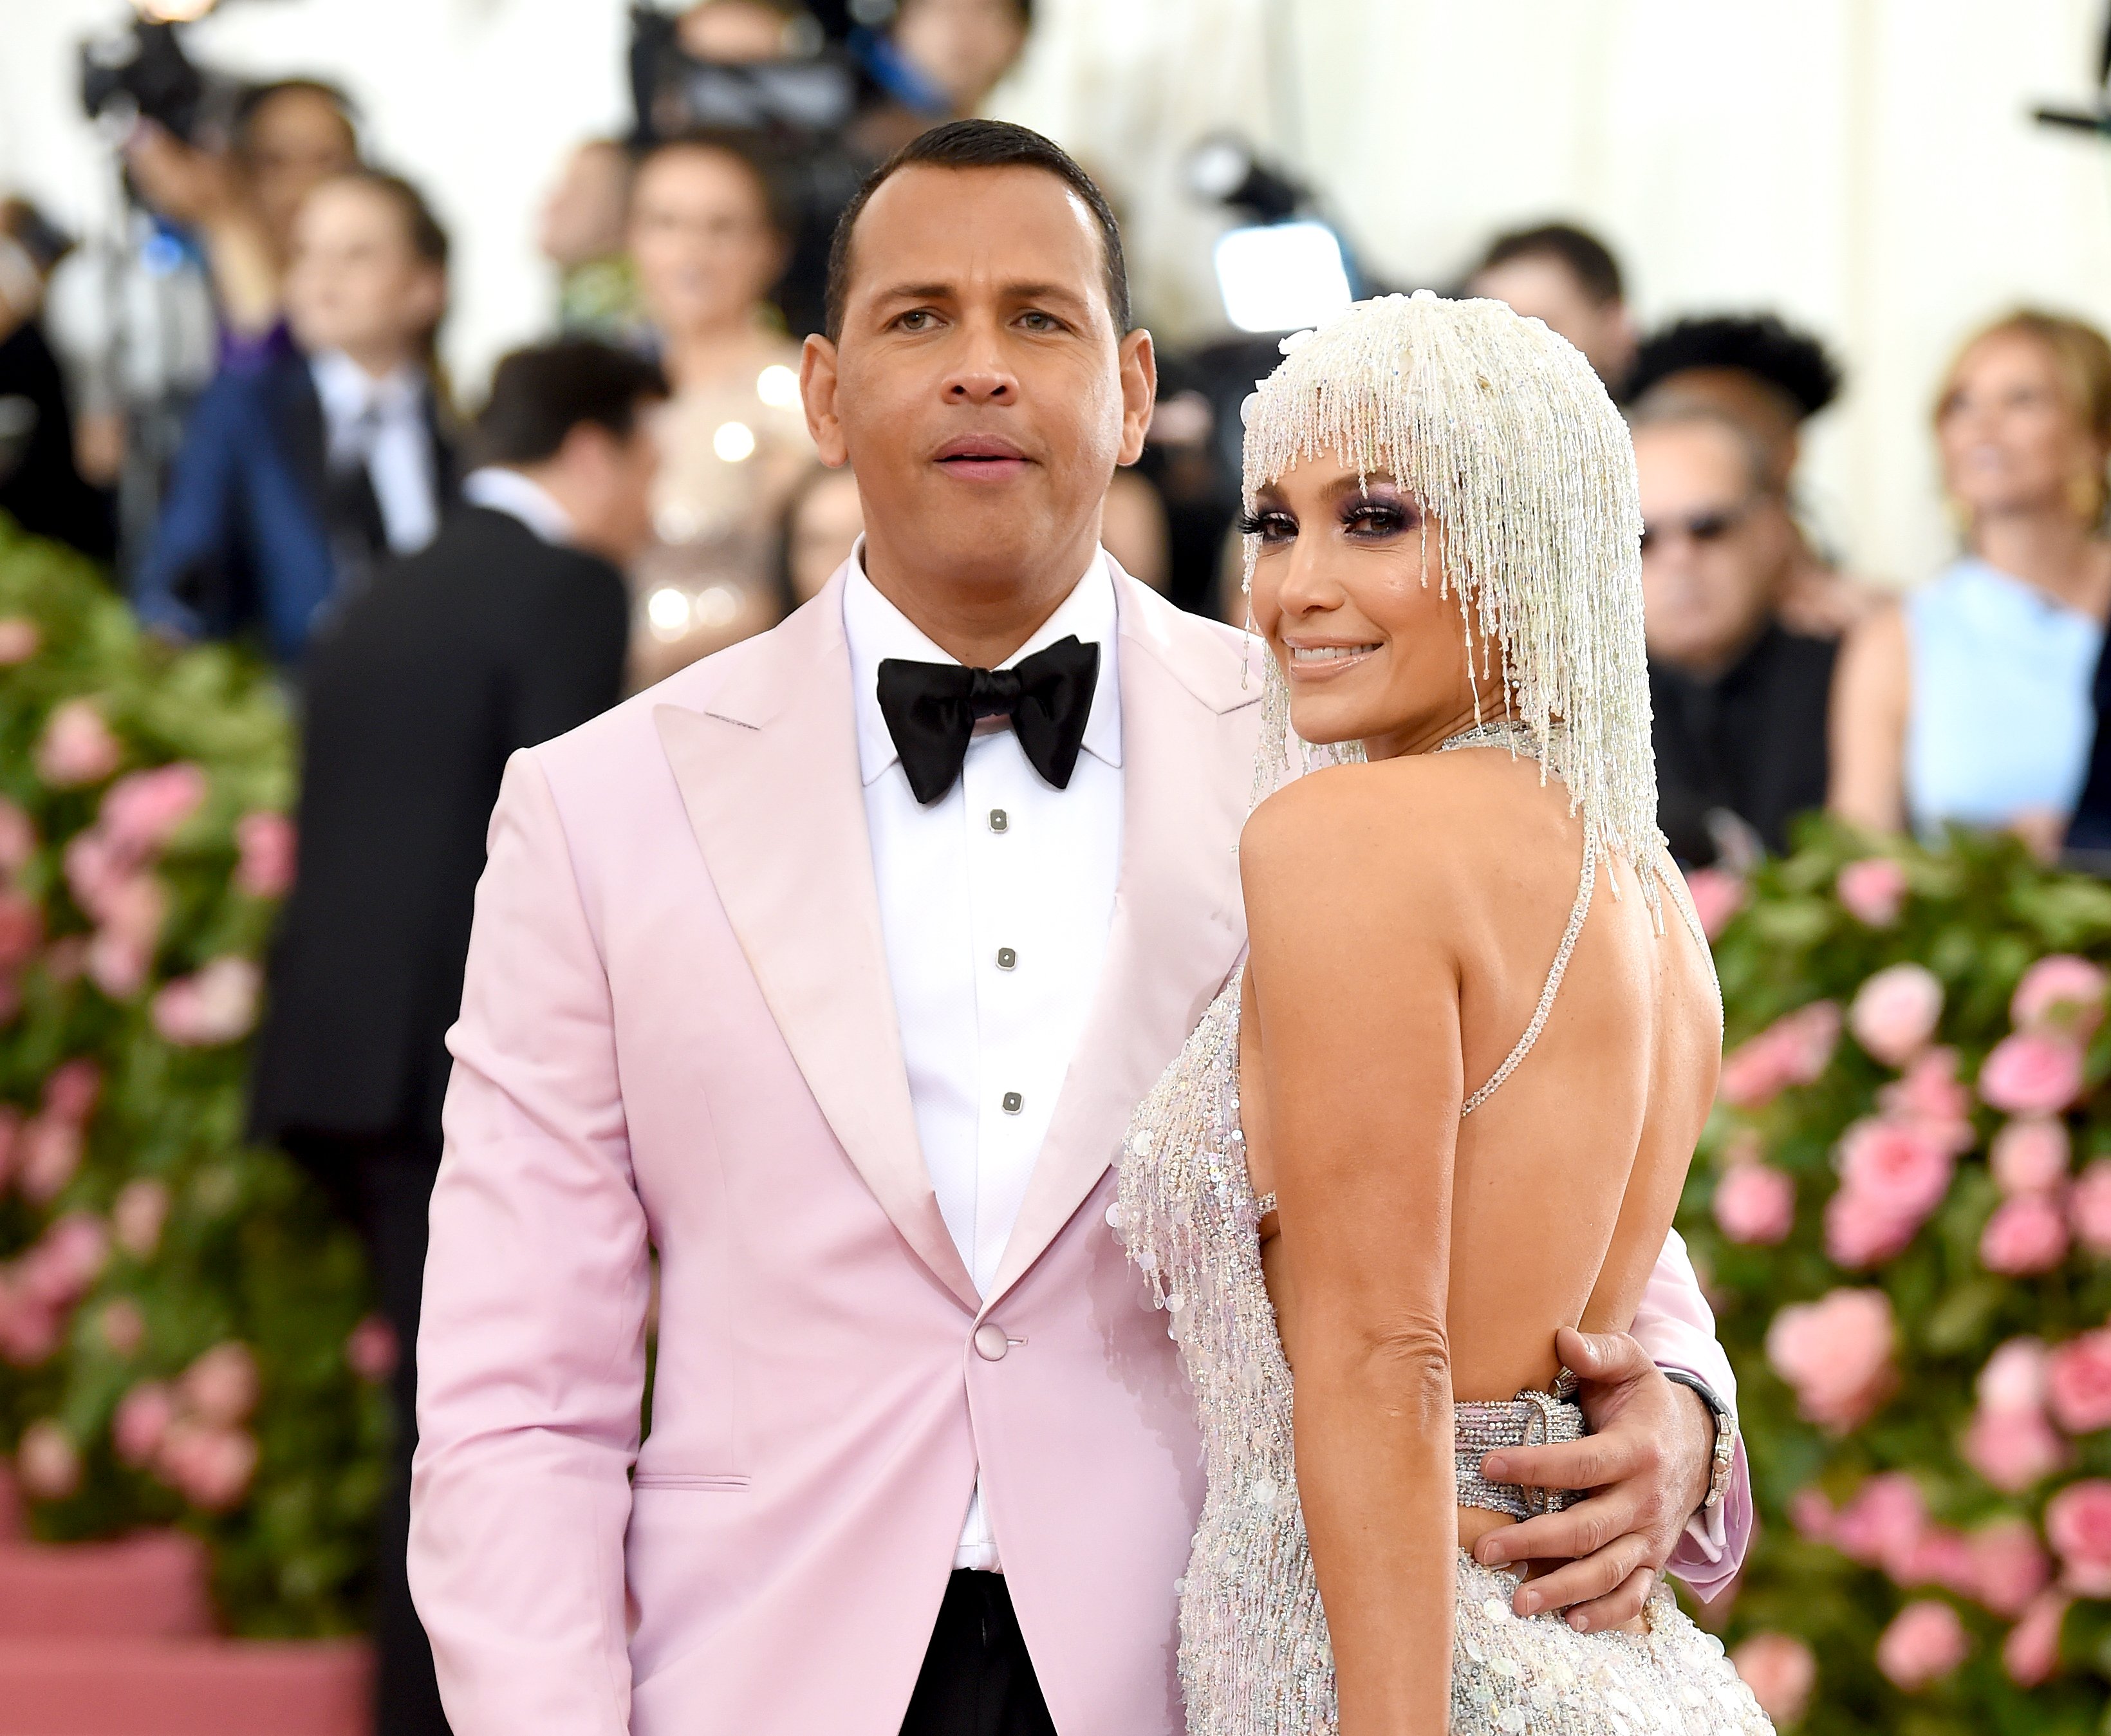 Alex Rodriquez and Jennifer Lopez attend The 2019 Met Gala Celebrating Camp: Notes on Fashion at Metropolitan Museum of Art on May 06, 2019, in New York City. | Source: Getty Images.